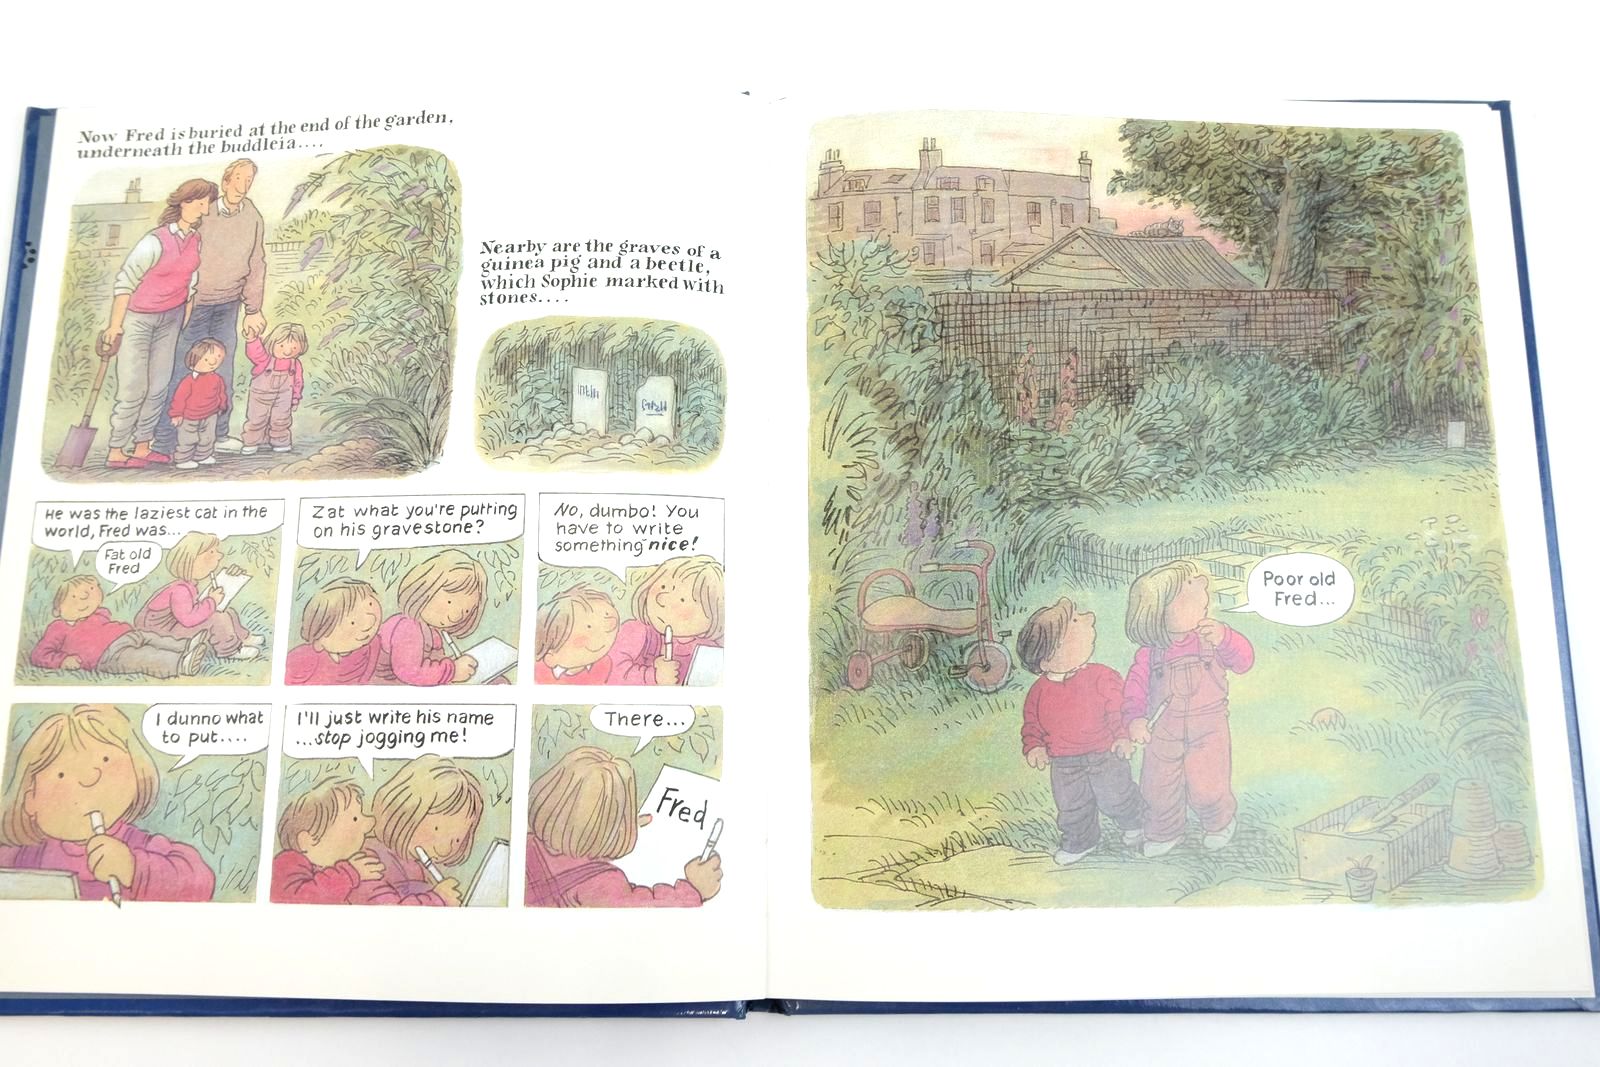 Photo of FRED written by Simmonds, Posy illustrated by Simmonds, Posy published by Jonathan Cape (STOCK CODE: 2135983)  for sale by Stella & Rose's Books